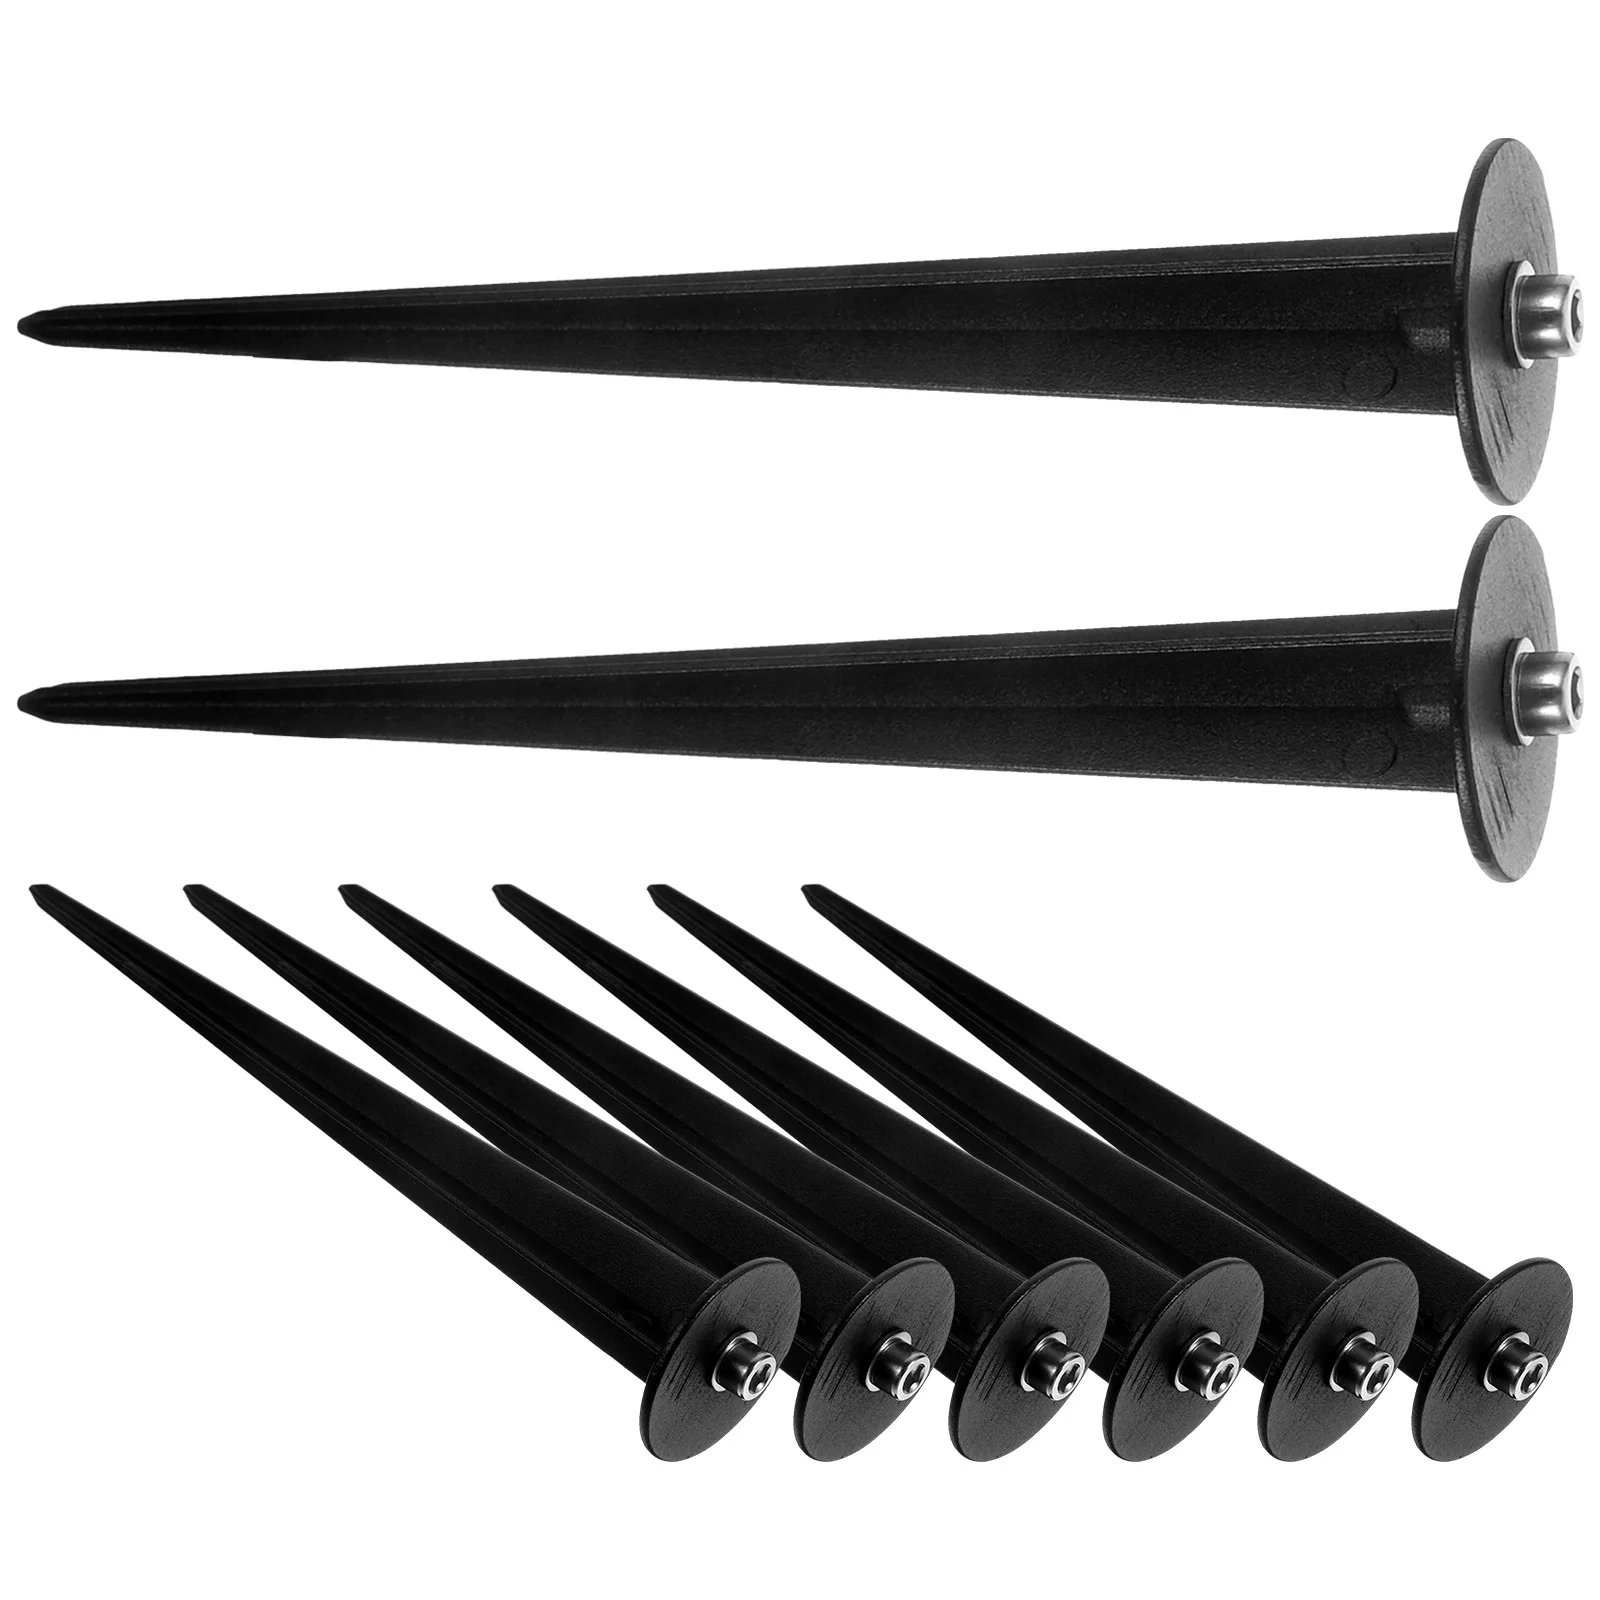 

8pcs Spikes Ground Stakes Path Light Stakes Replacement Aluminum Ground Stakes